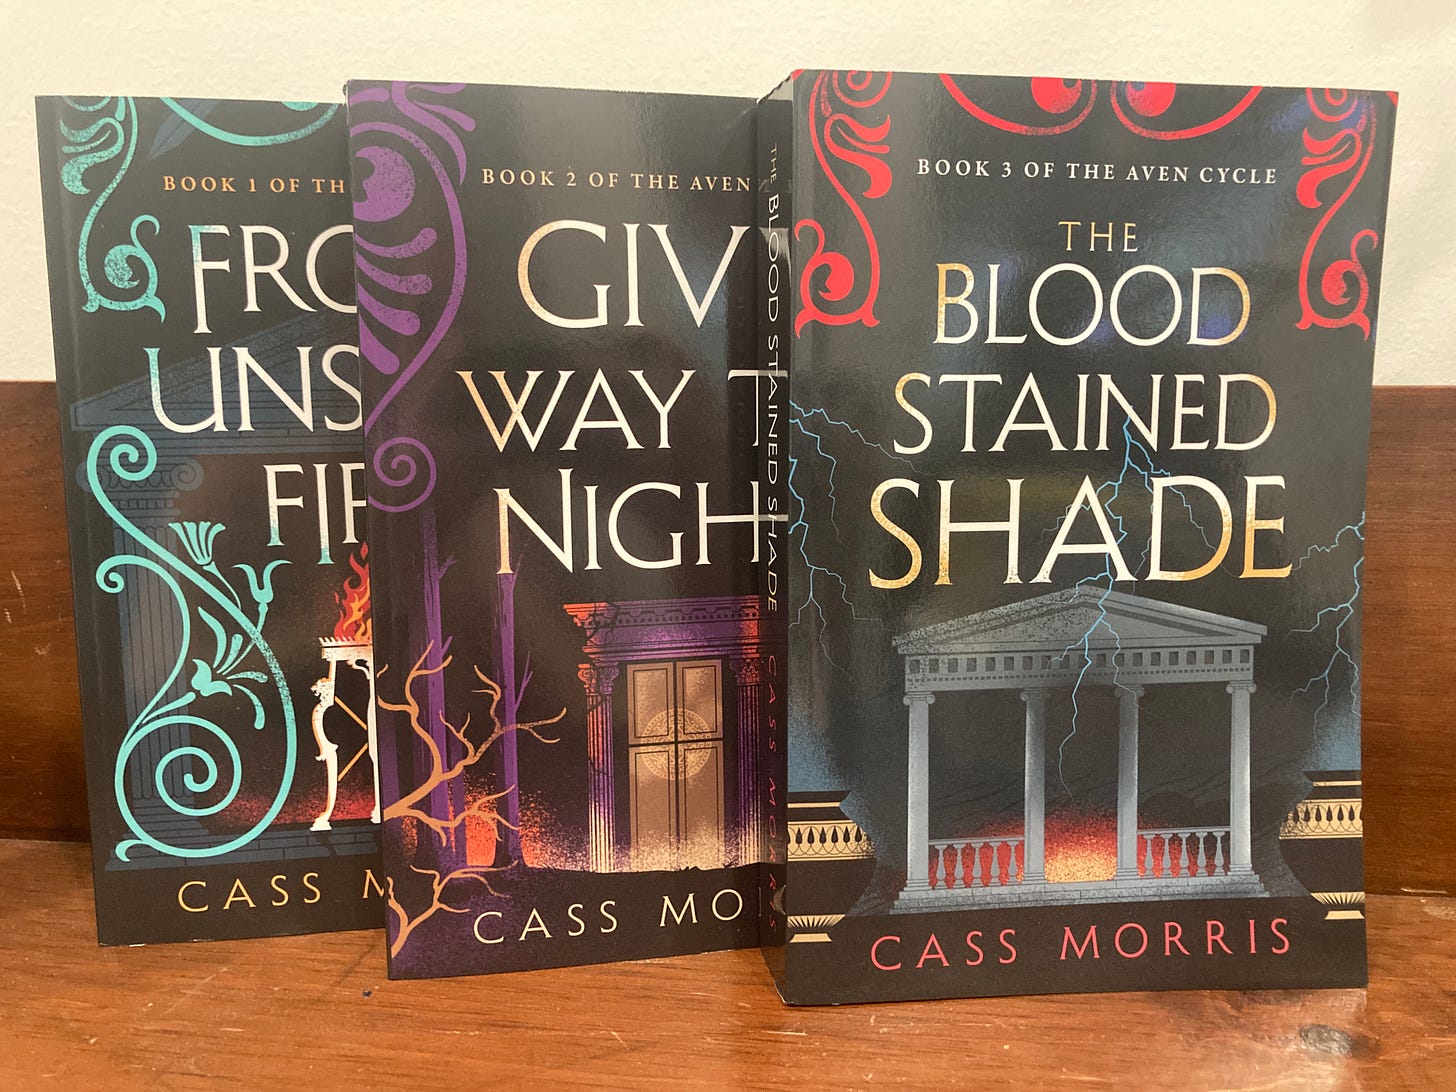 Paperback editions of FROM UNSEEN FIRE, GIVE WAY TO NIGHT, and THE BLOODSTAINED SHADE, standing upright and overlapping on a wooden table